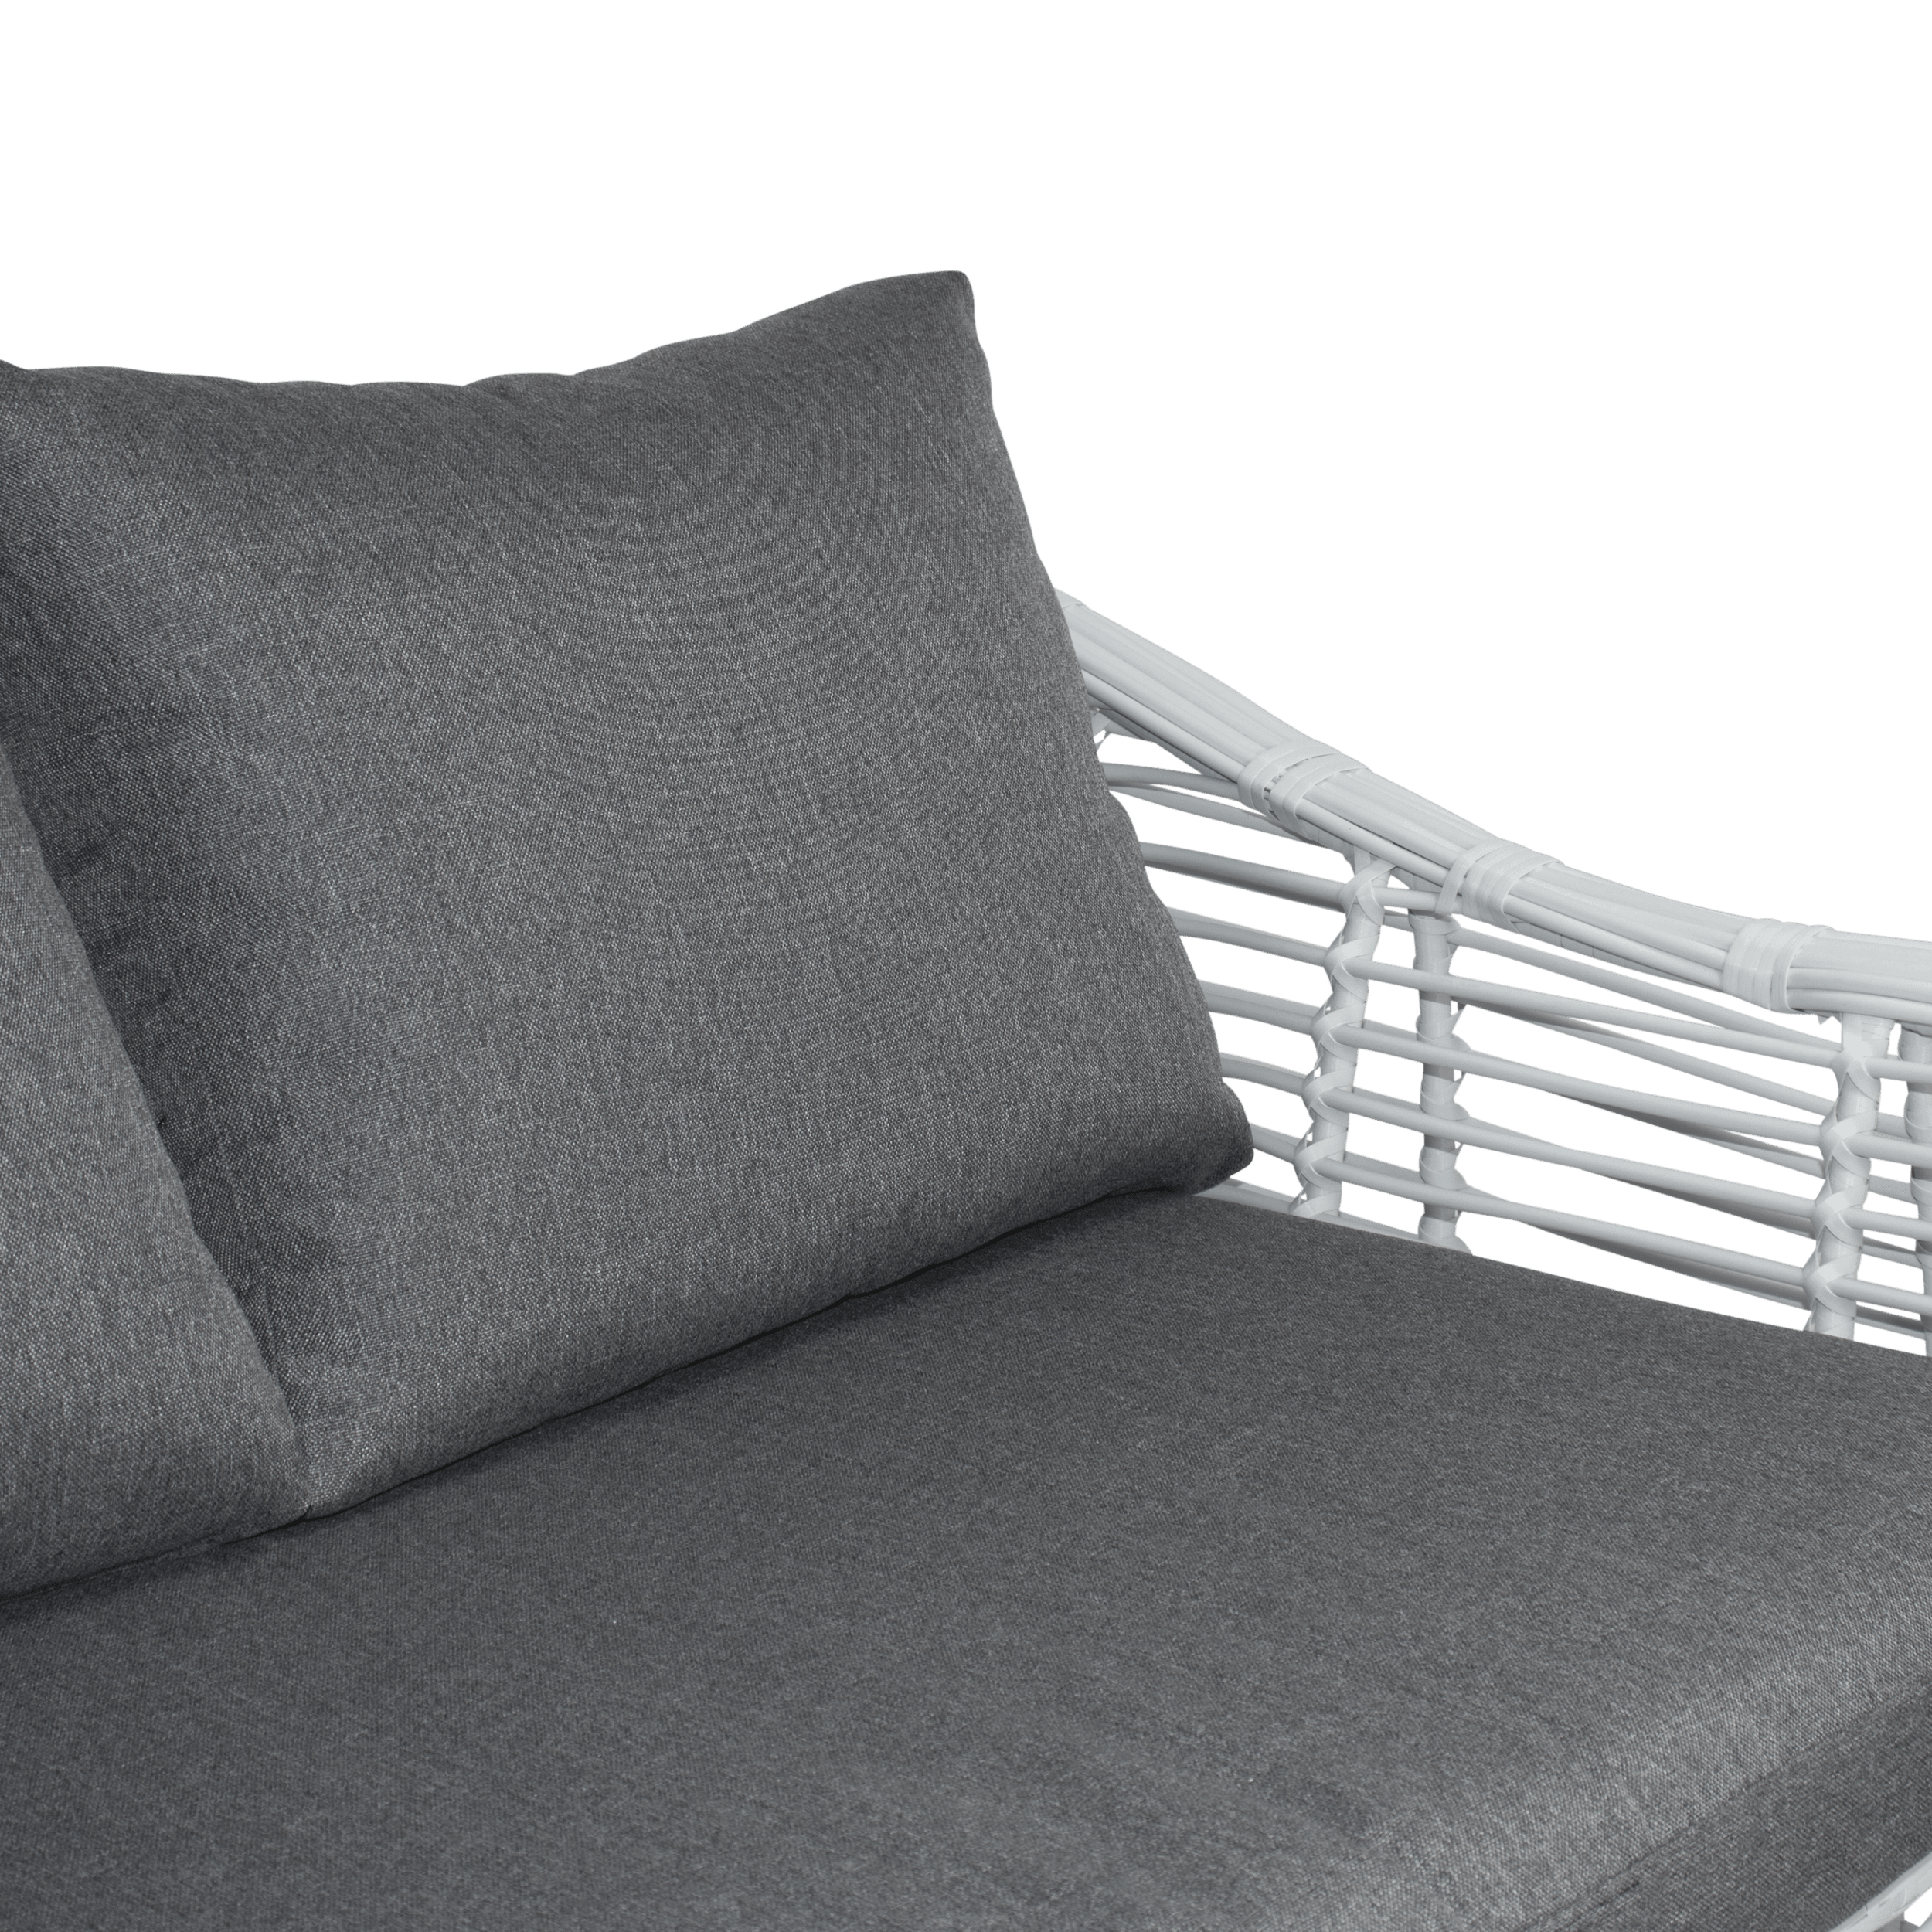 Barbados 2 Seater in Arctic White Wicker and Pebble Olefin Cushions